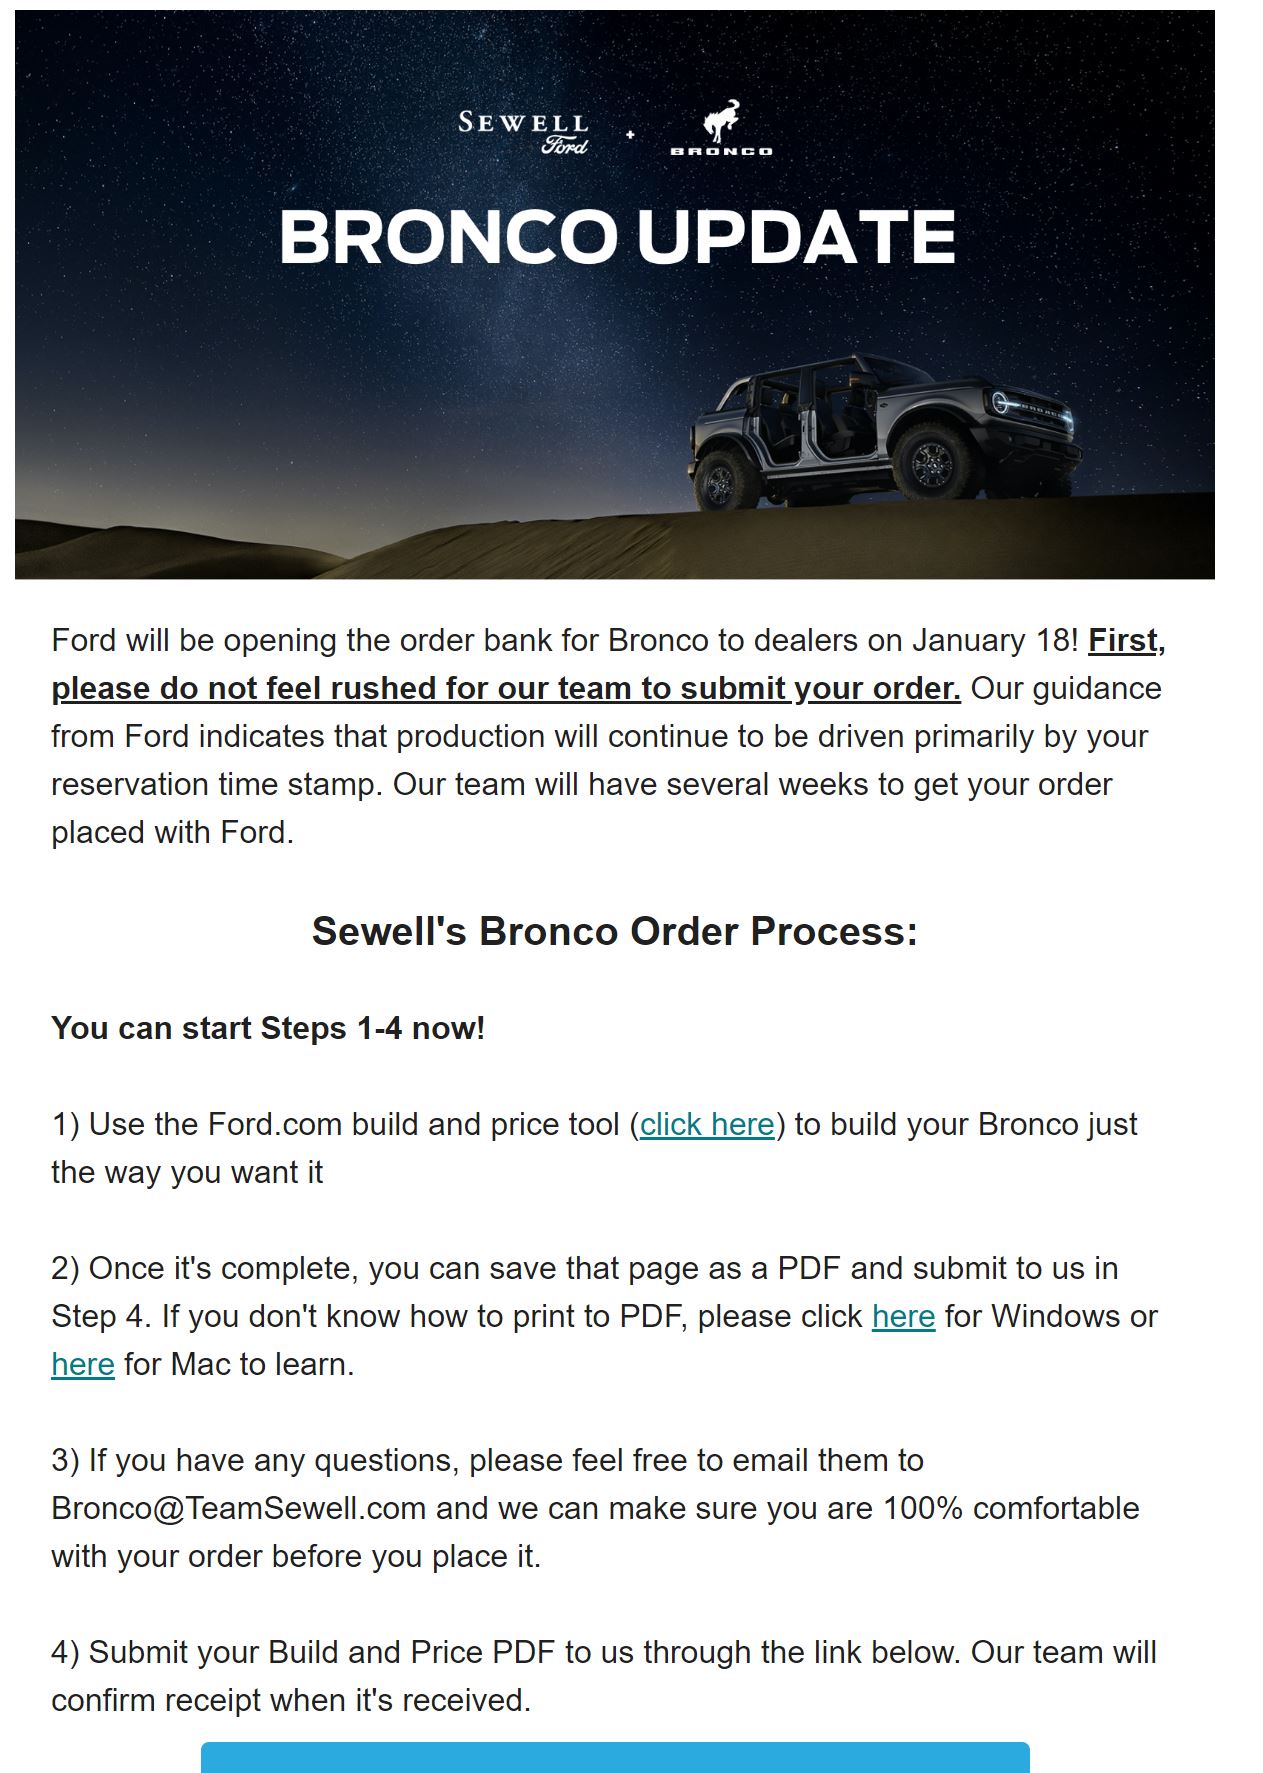 Sewell Email Bronco Order Process 1.JPG